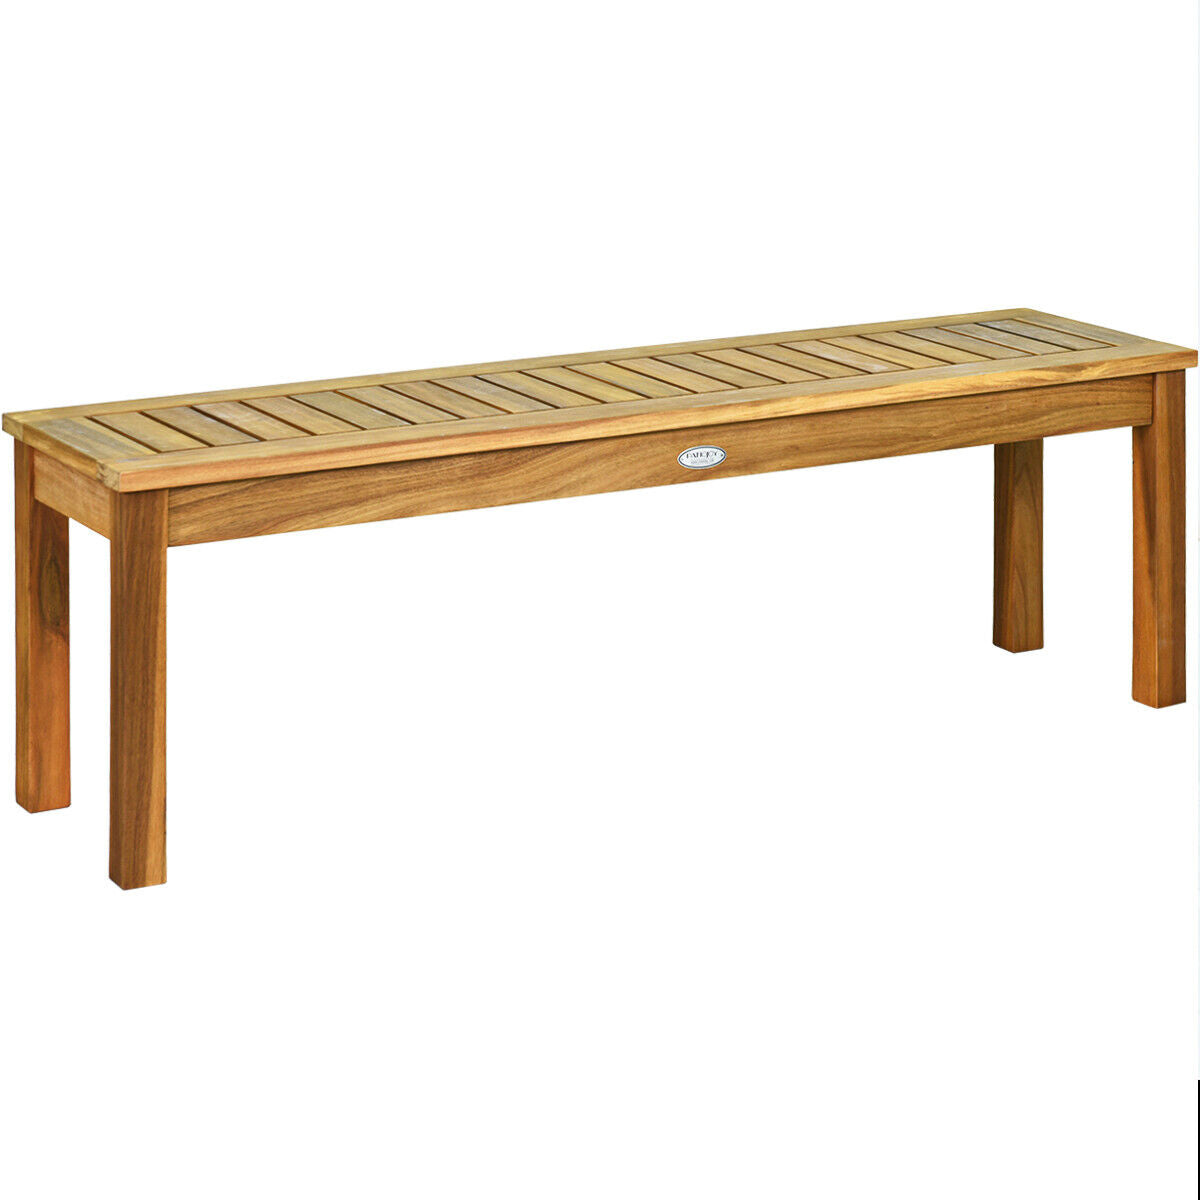 132 cm Outdoor Acacia Wood Dining Bench